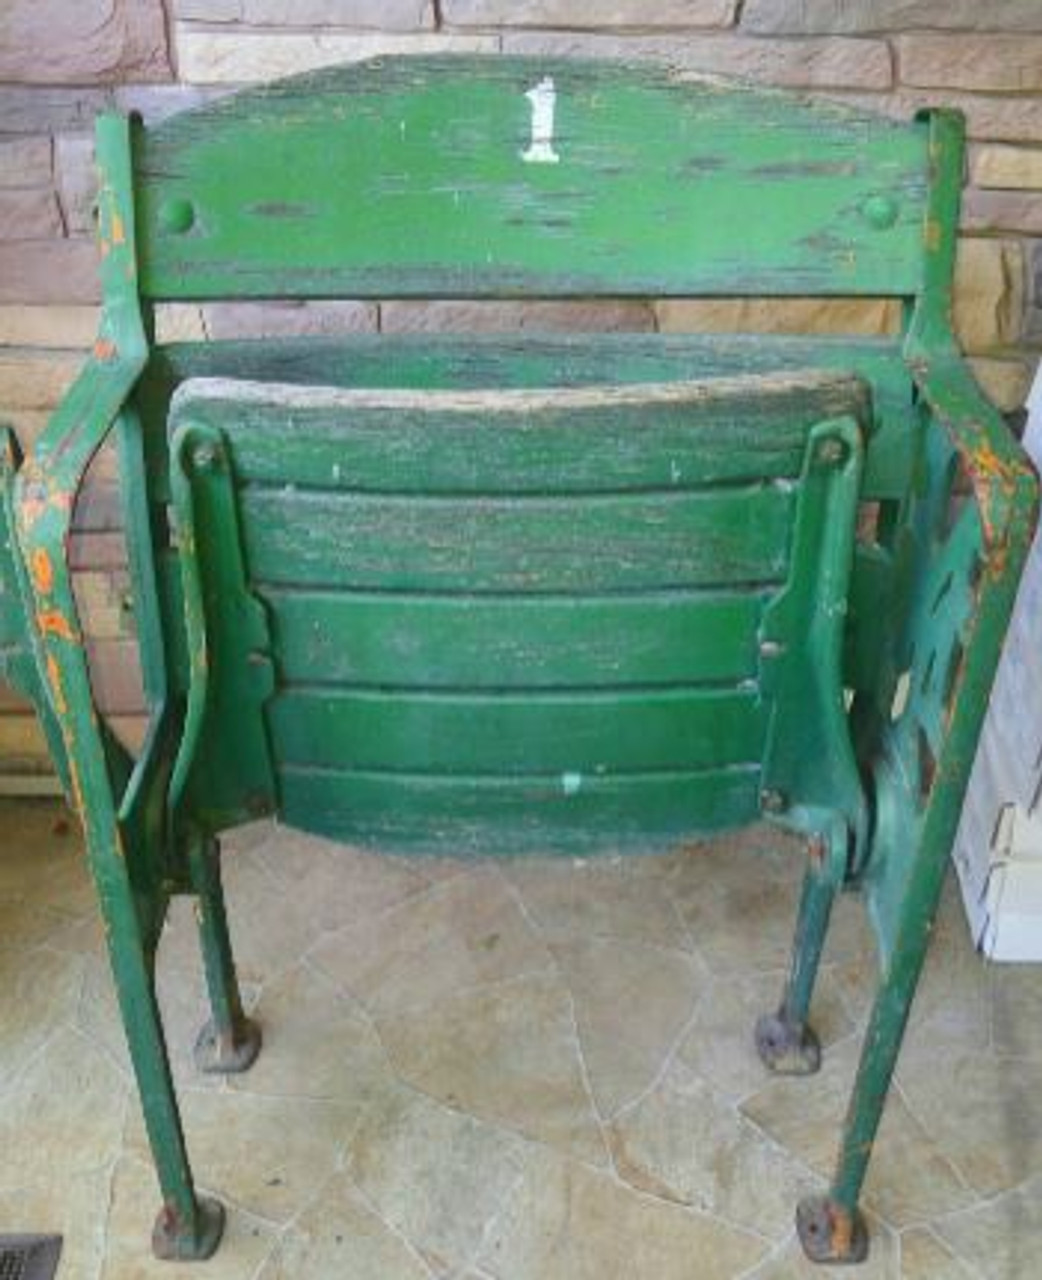 Polo Grounds Free Standing Box Seat - New York Giants